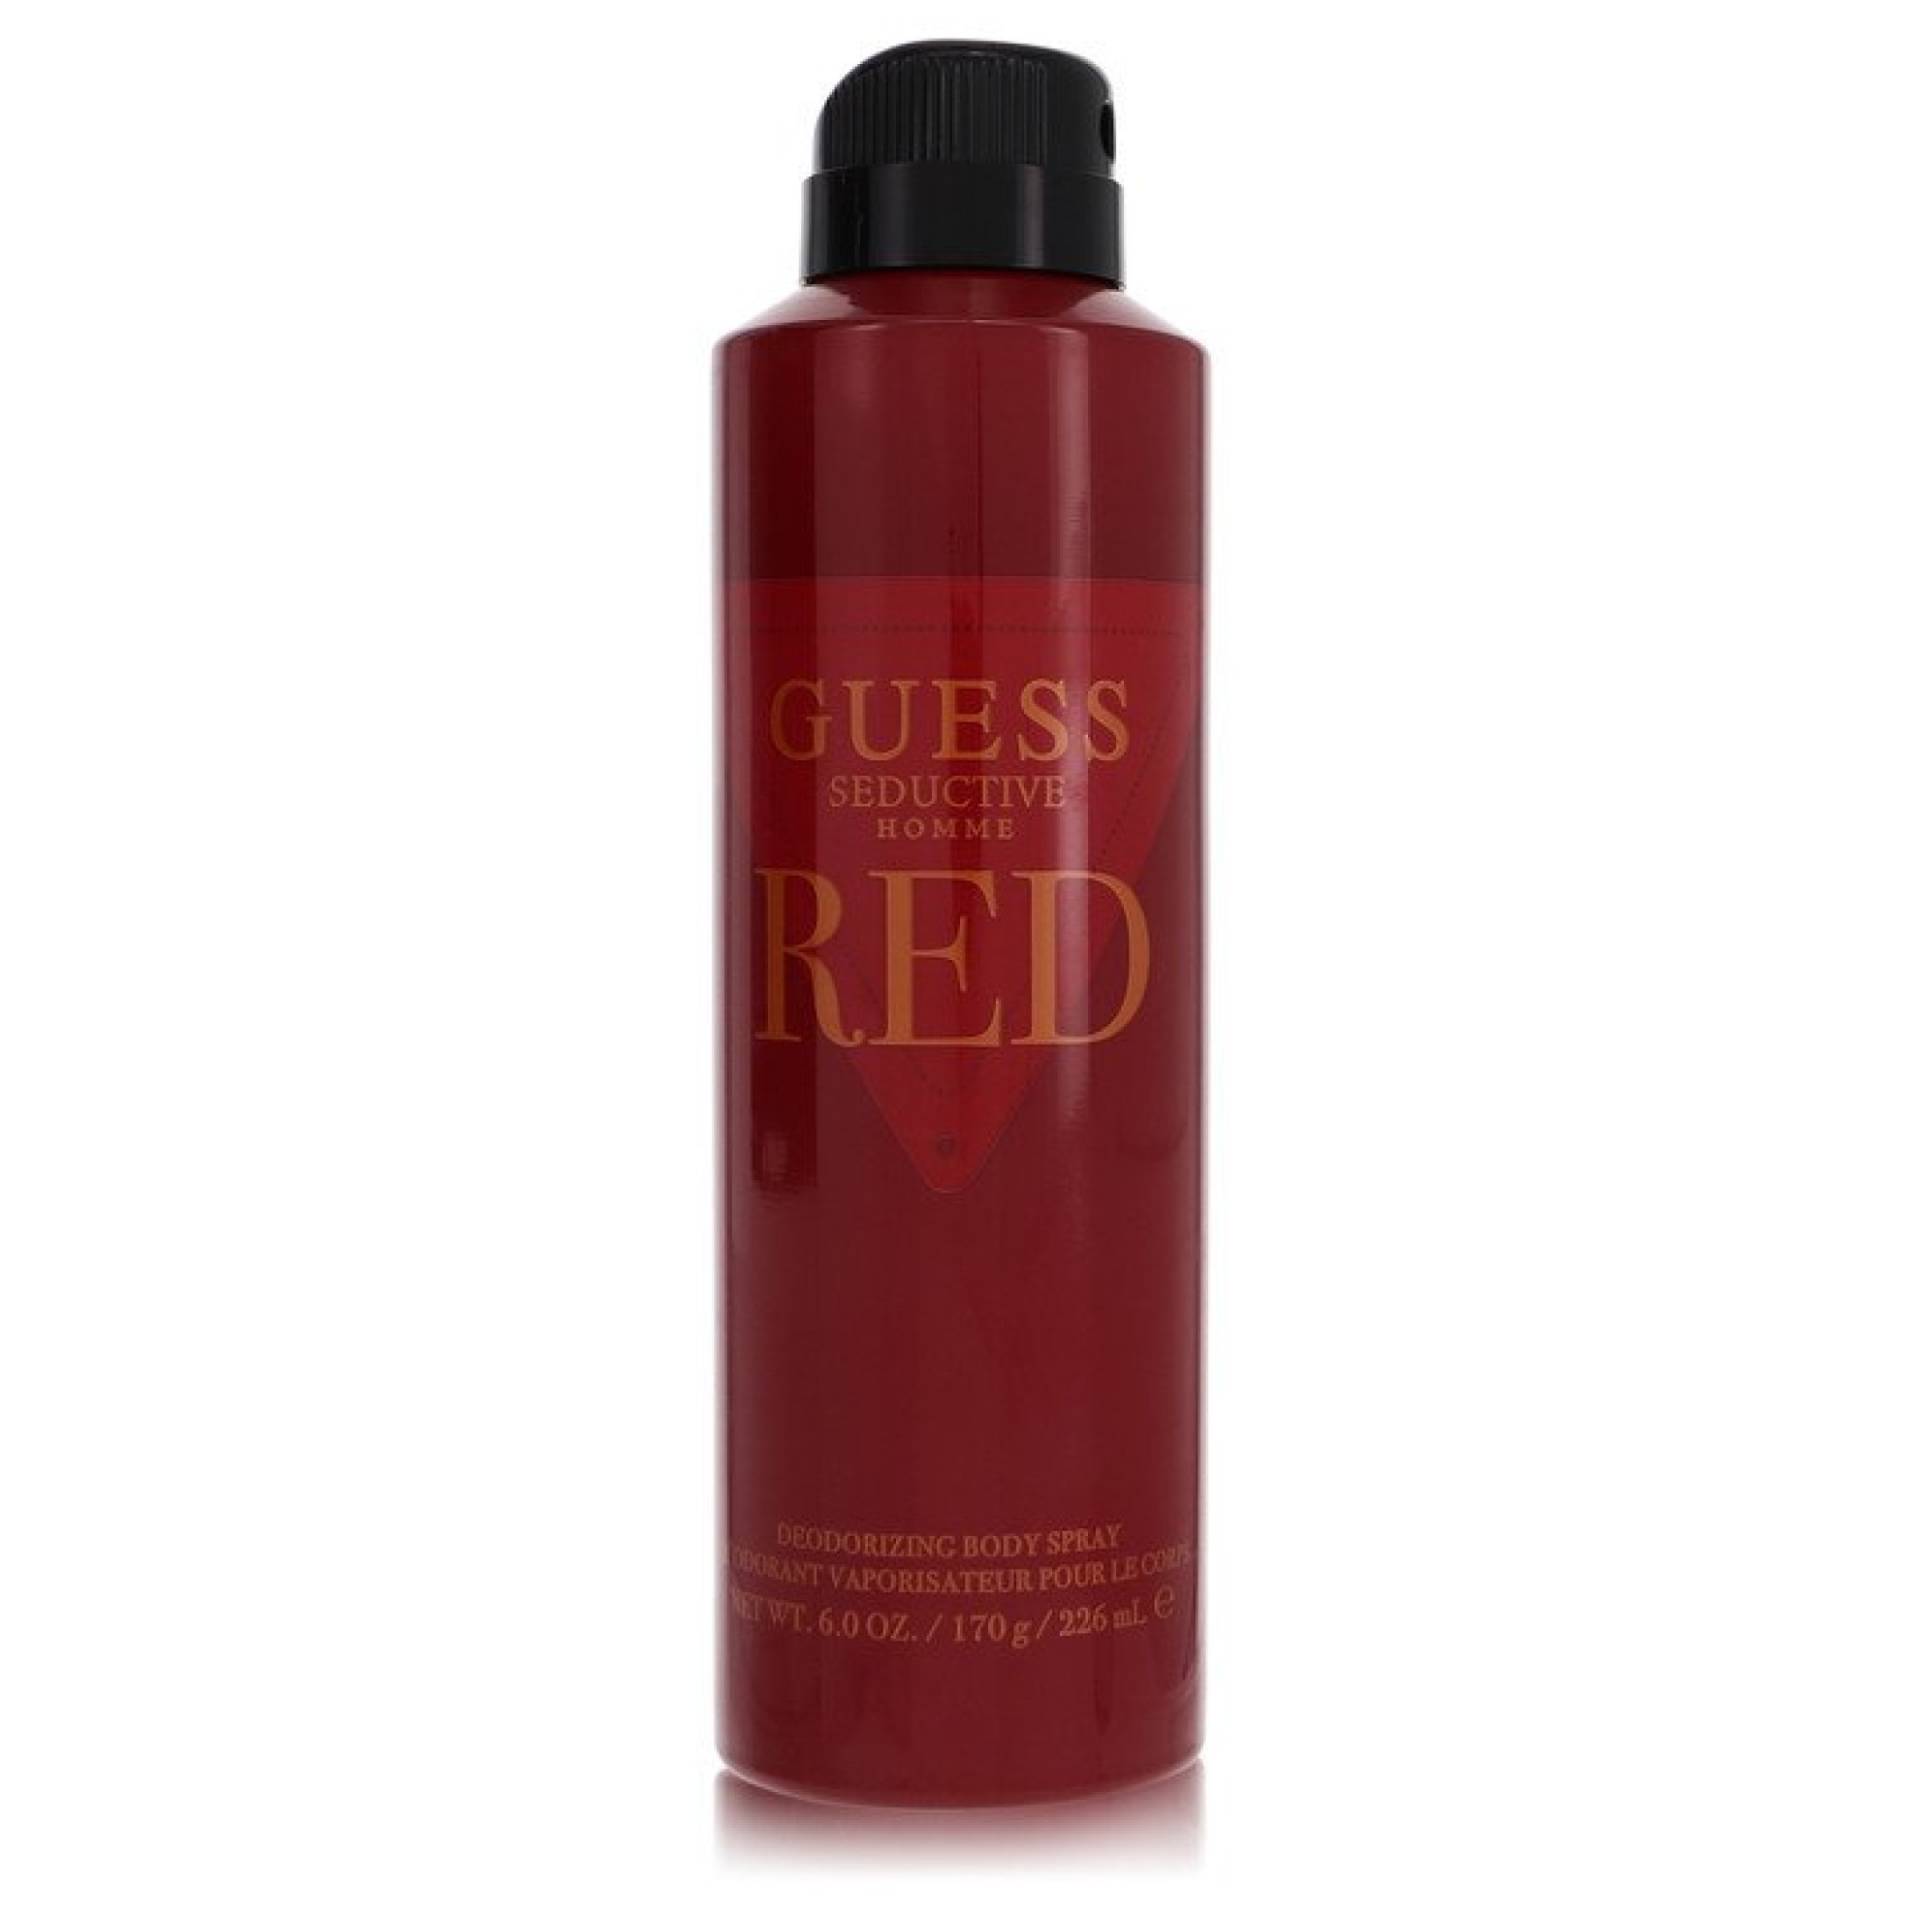 Guess Seductive Homme Red Body Spray 177 ml von Guess